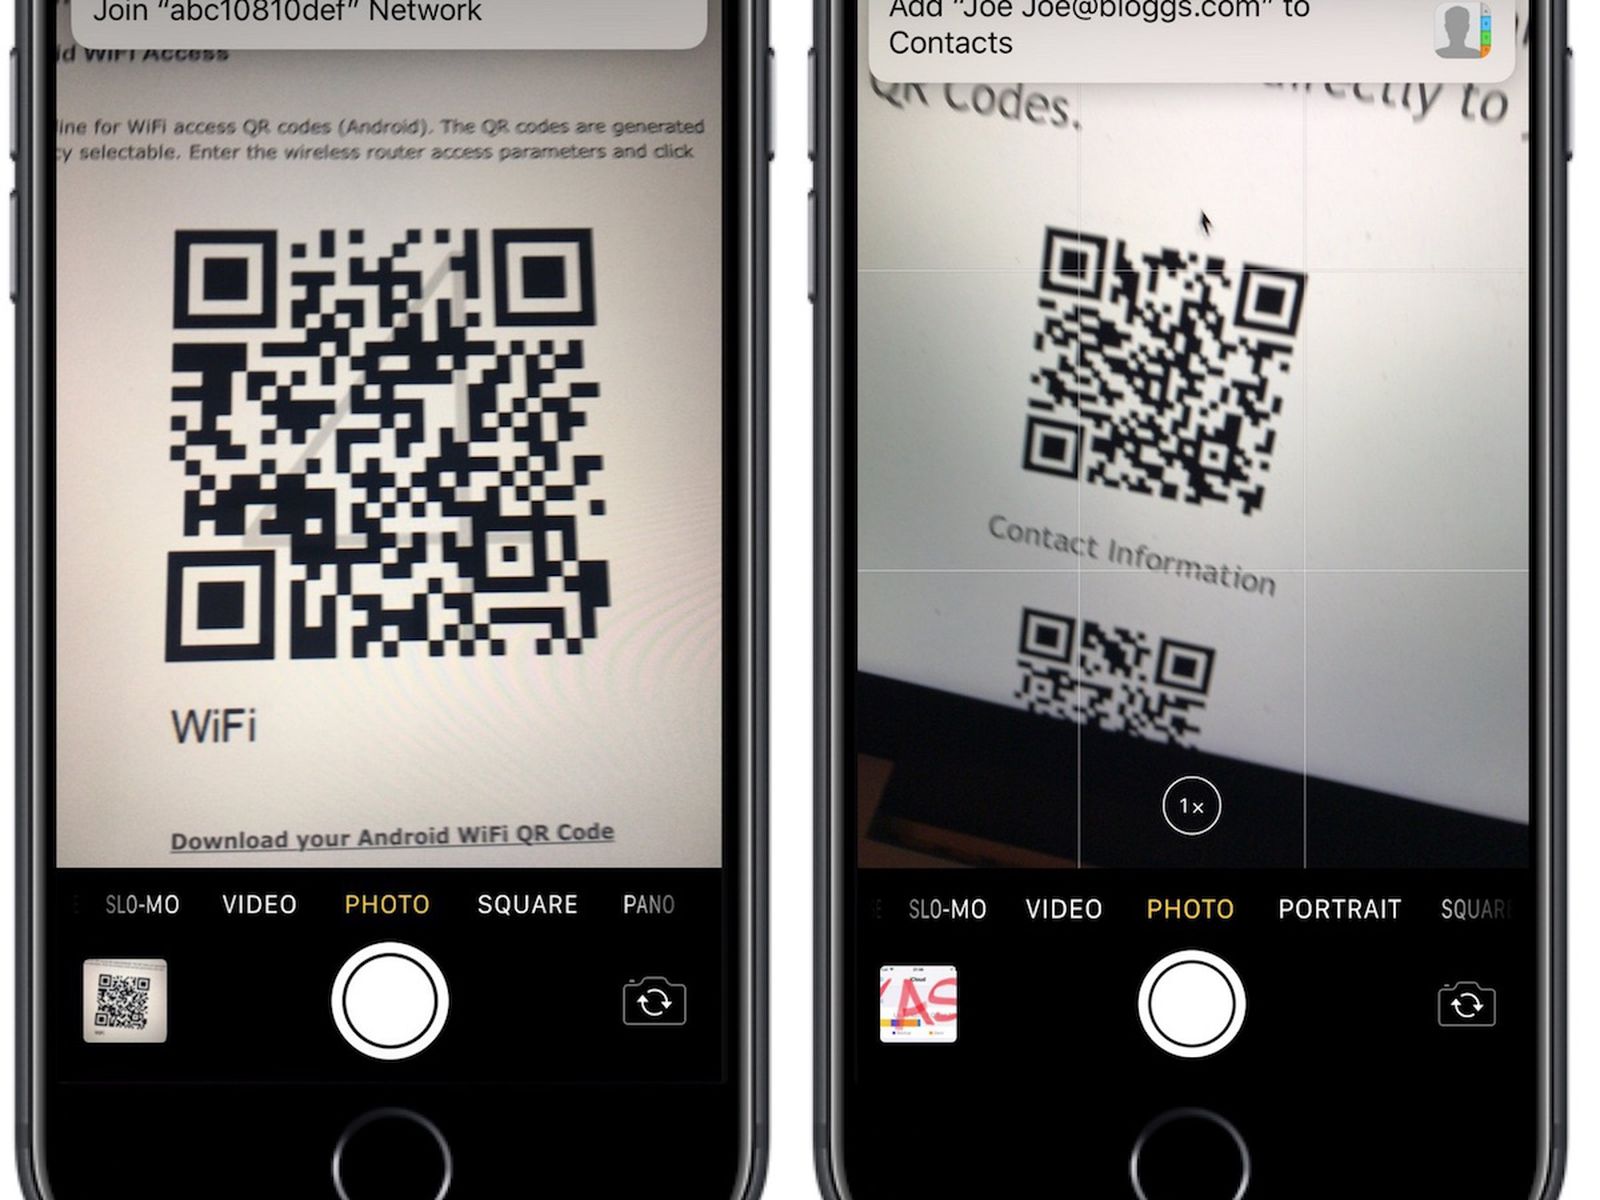 Iphone can scan qr codes directly in camera app on ios